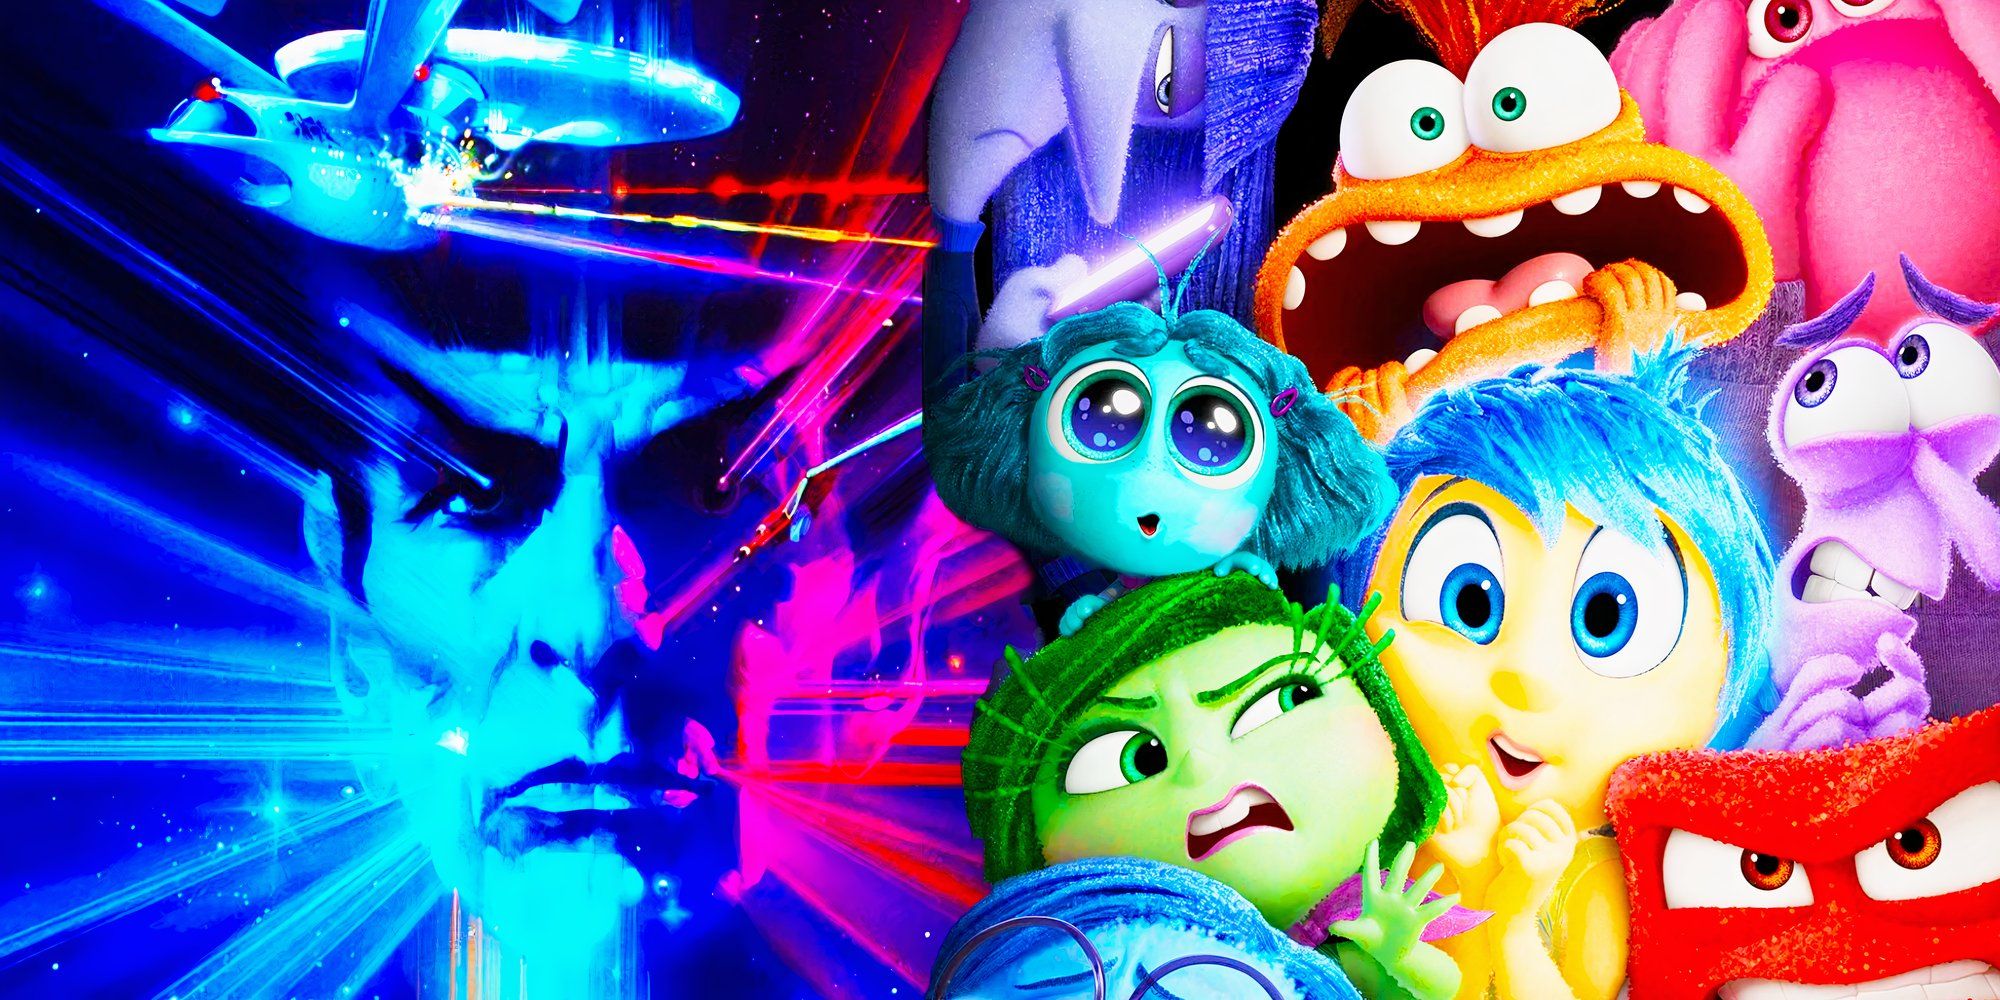 Custom Image combining The Search for Spock and Inside Out 2 Posters